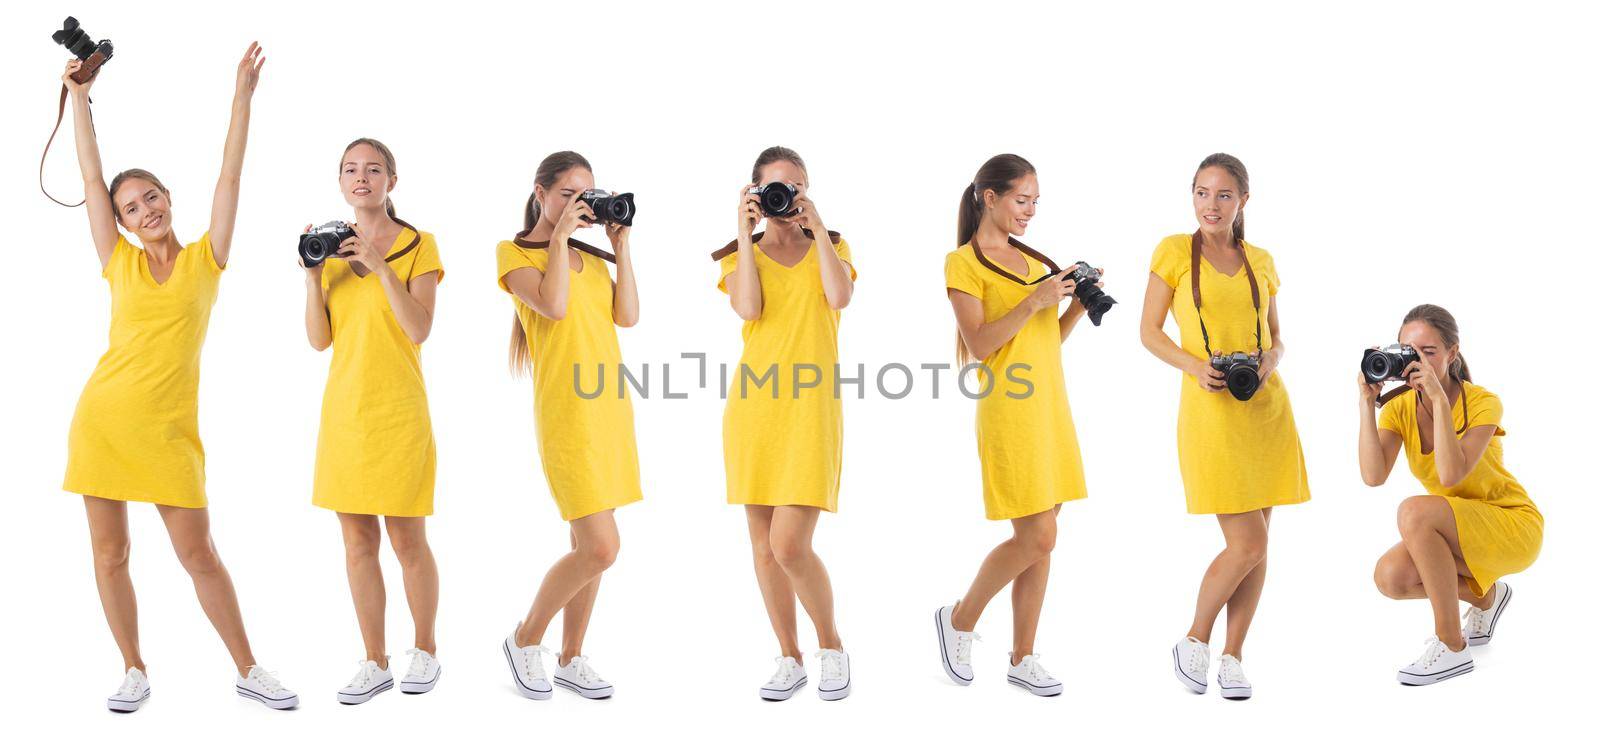 Set of photographer woman portraits isolated over white background.